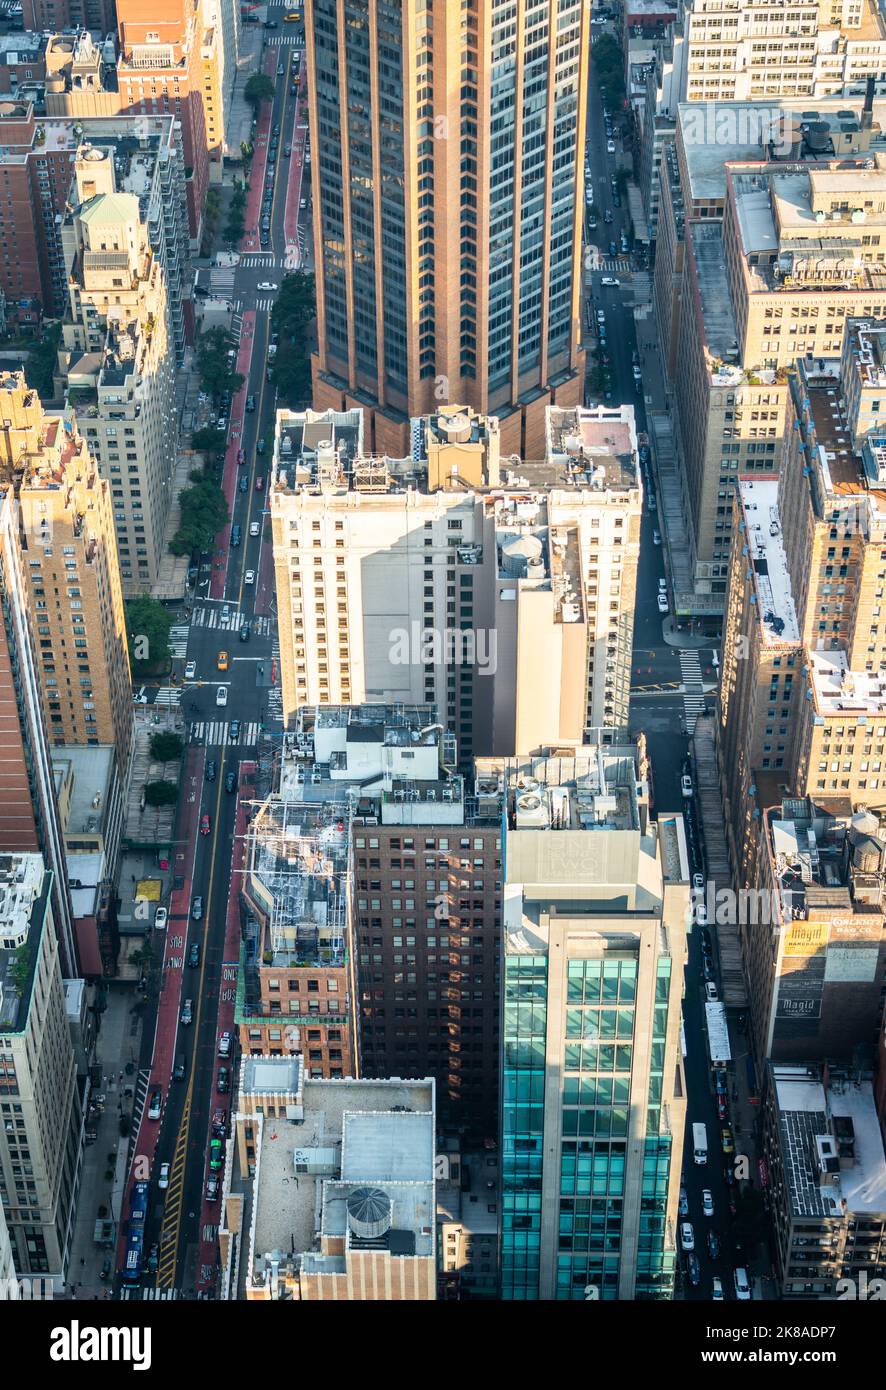 New York City, United States - September 18, 2022. Aerial view of the streets and rooftops of Manhattan Stock Photo